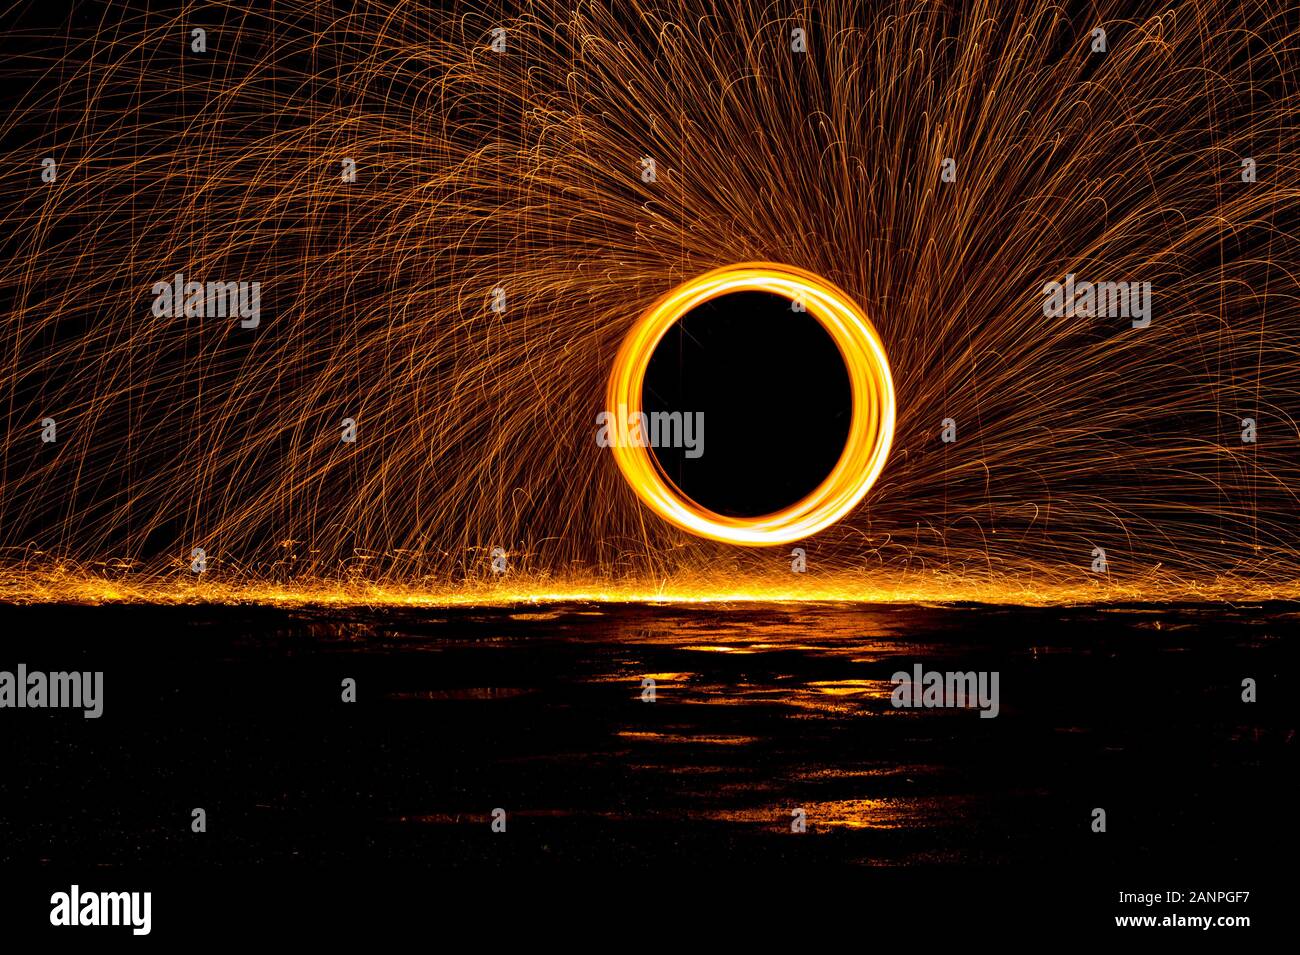 Steel wool painting with light in darkness spark effect and reflections on wet ground Stock Photo